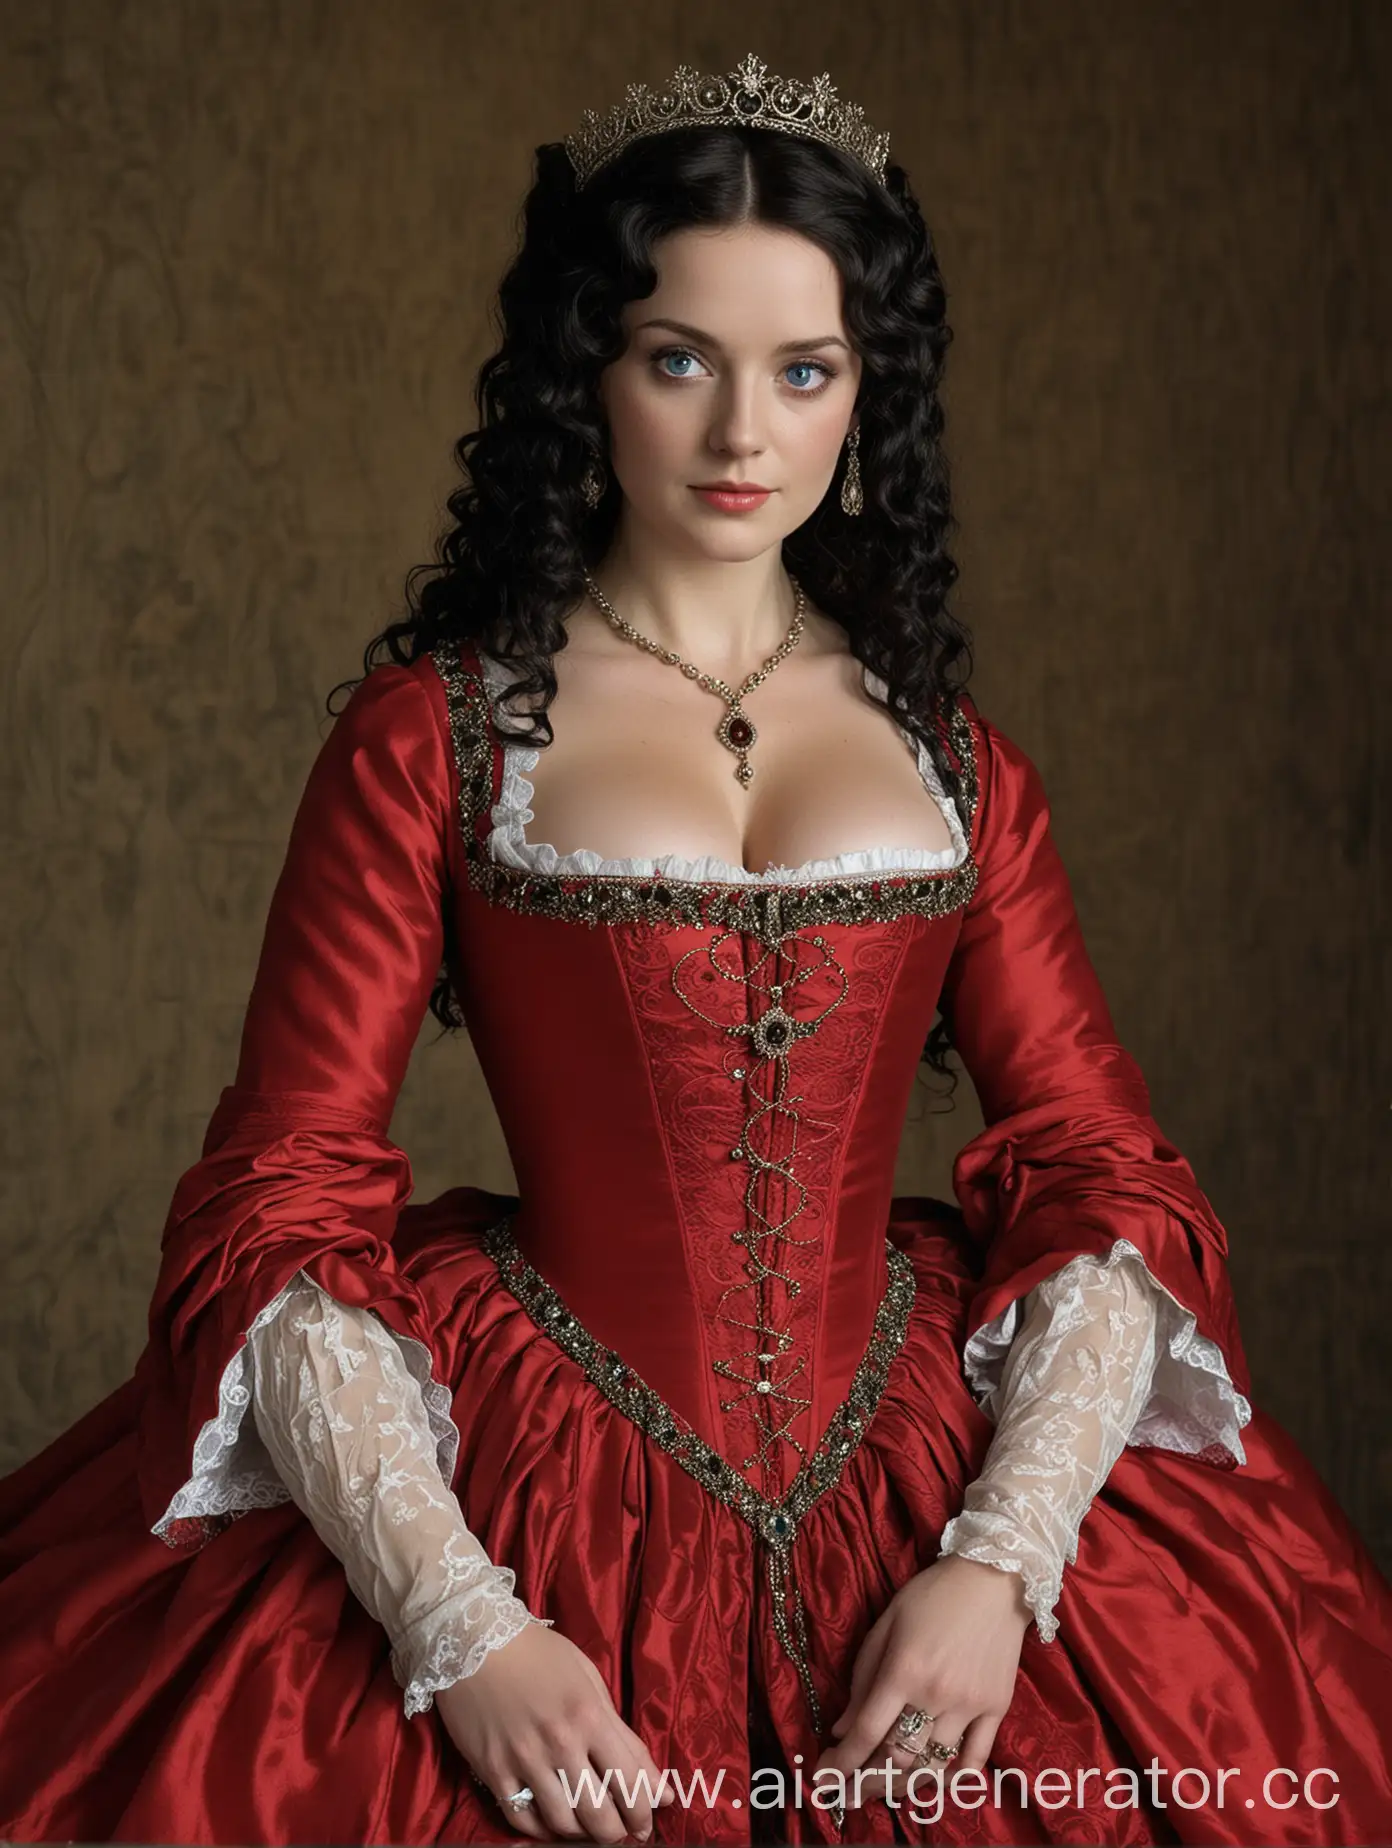 Tudor-Lady-in-Red-Portrait-with-King-Henry-VIII-in-Castle-Setting